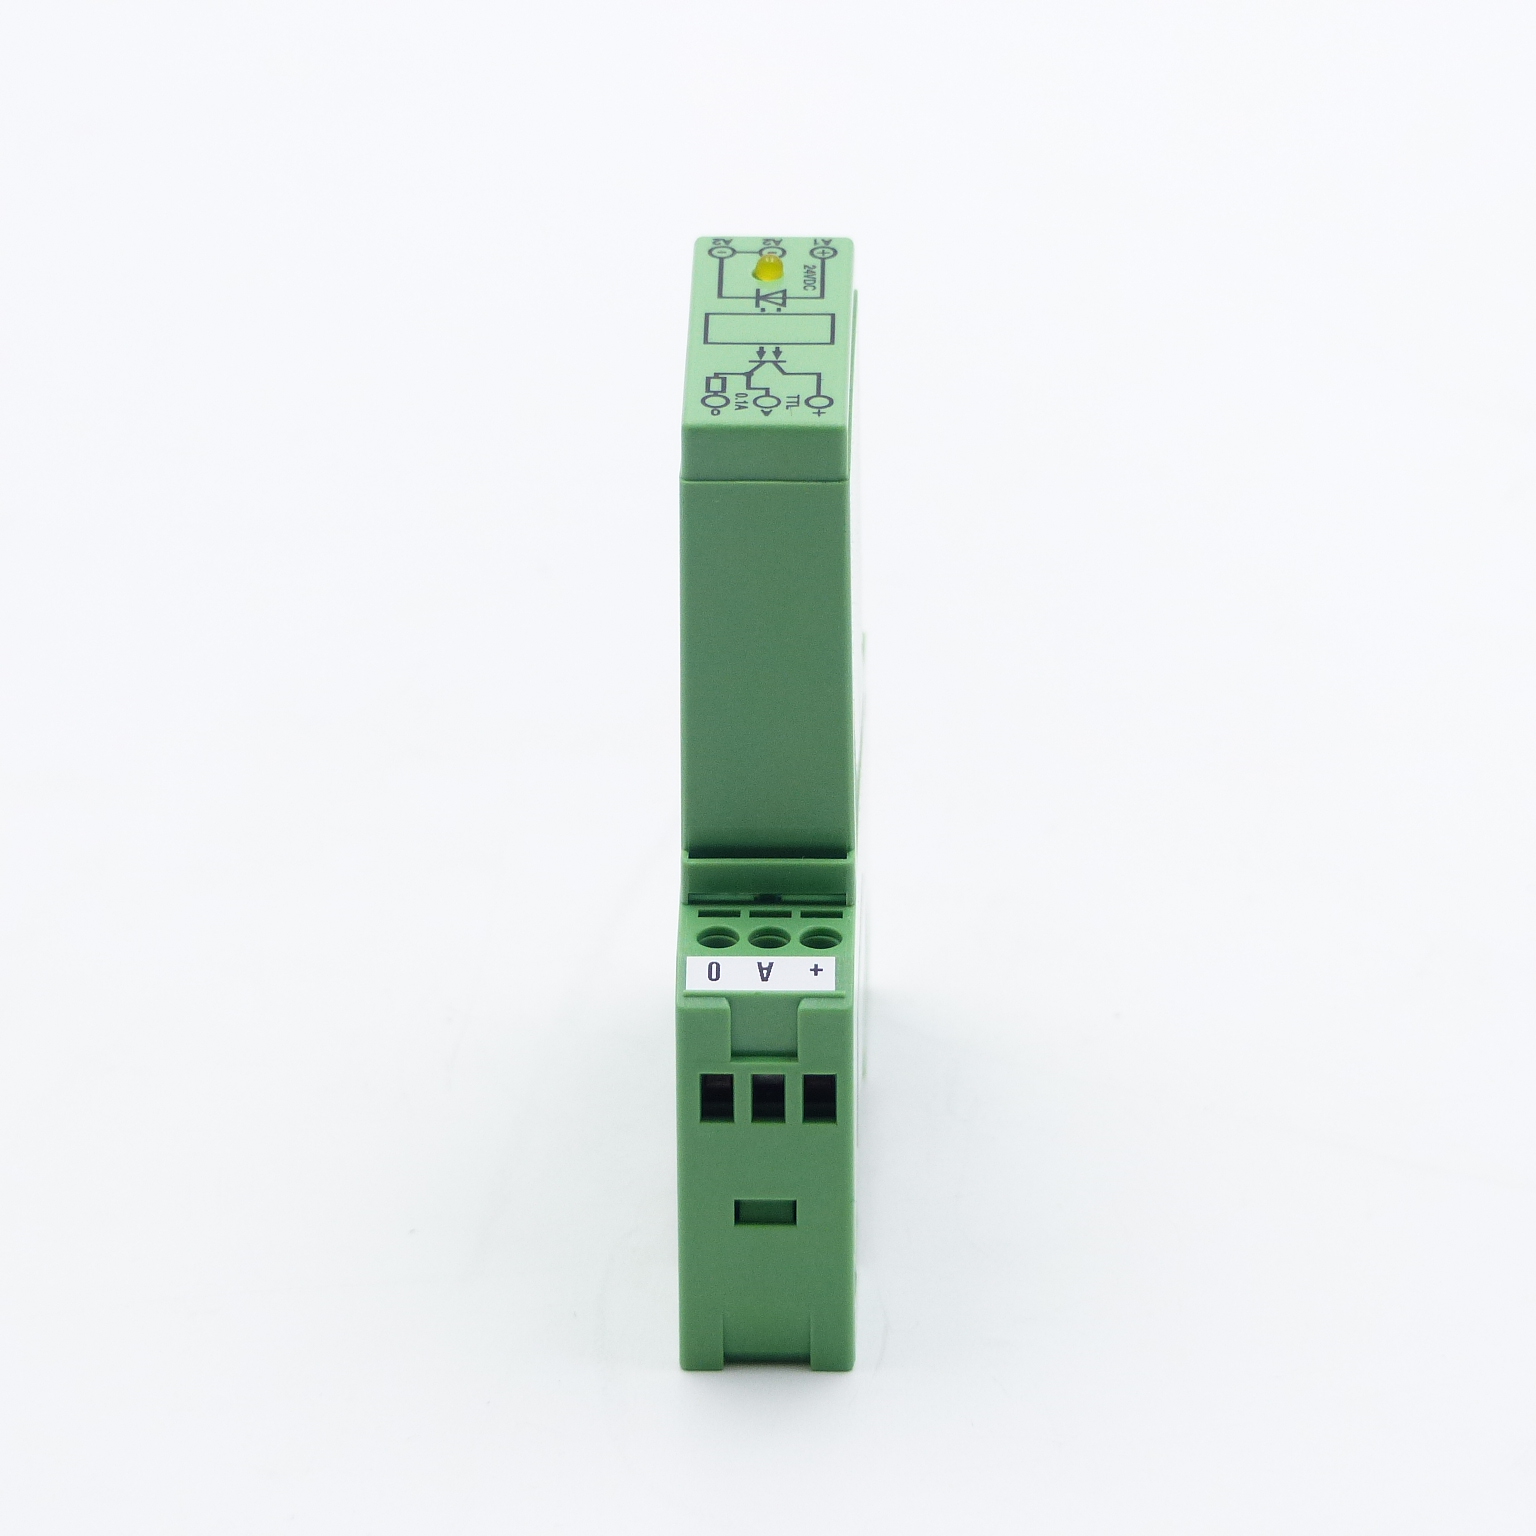 Solid-State-Relaismodul EMG 17-OE-24DC/TTL/100 